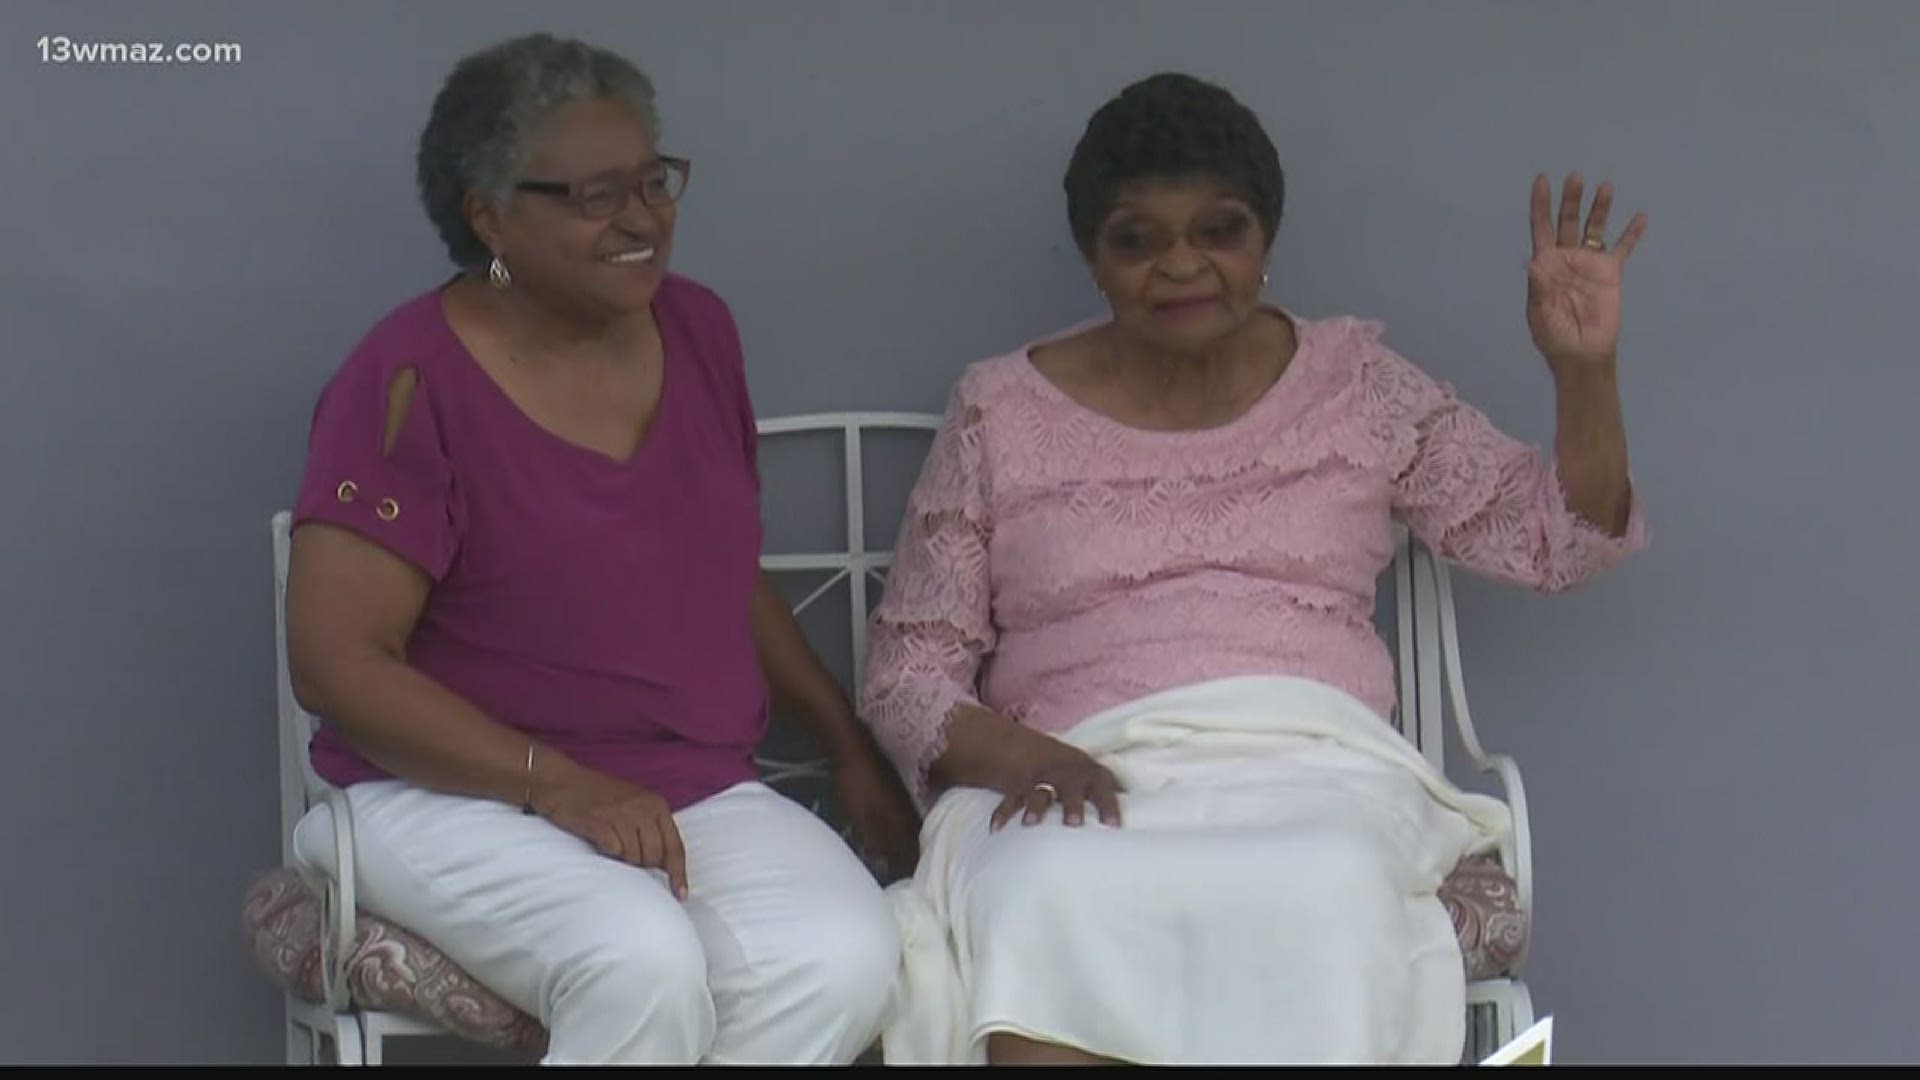 A Macon woman celebrated a big birthday Friday while social distancing. Alice Mason celebrated her 100th birthday virtually with her family and friends.